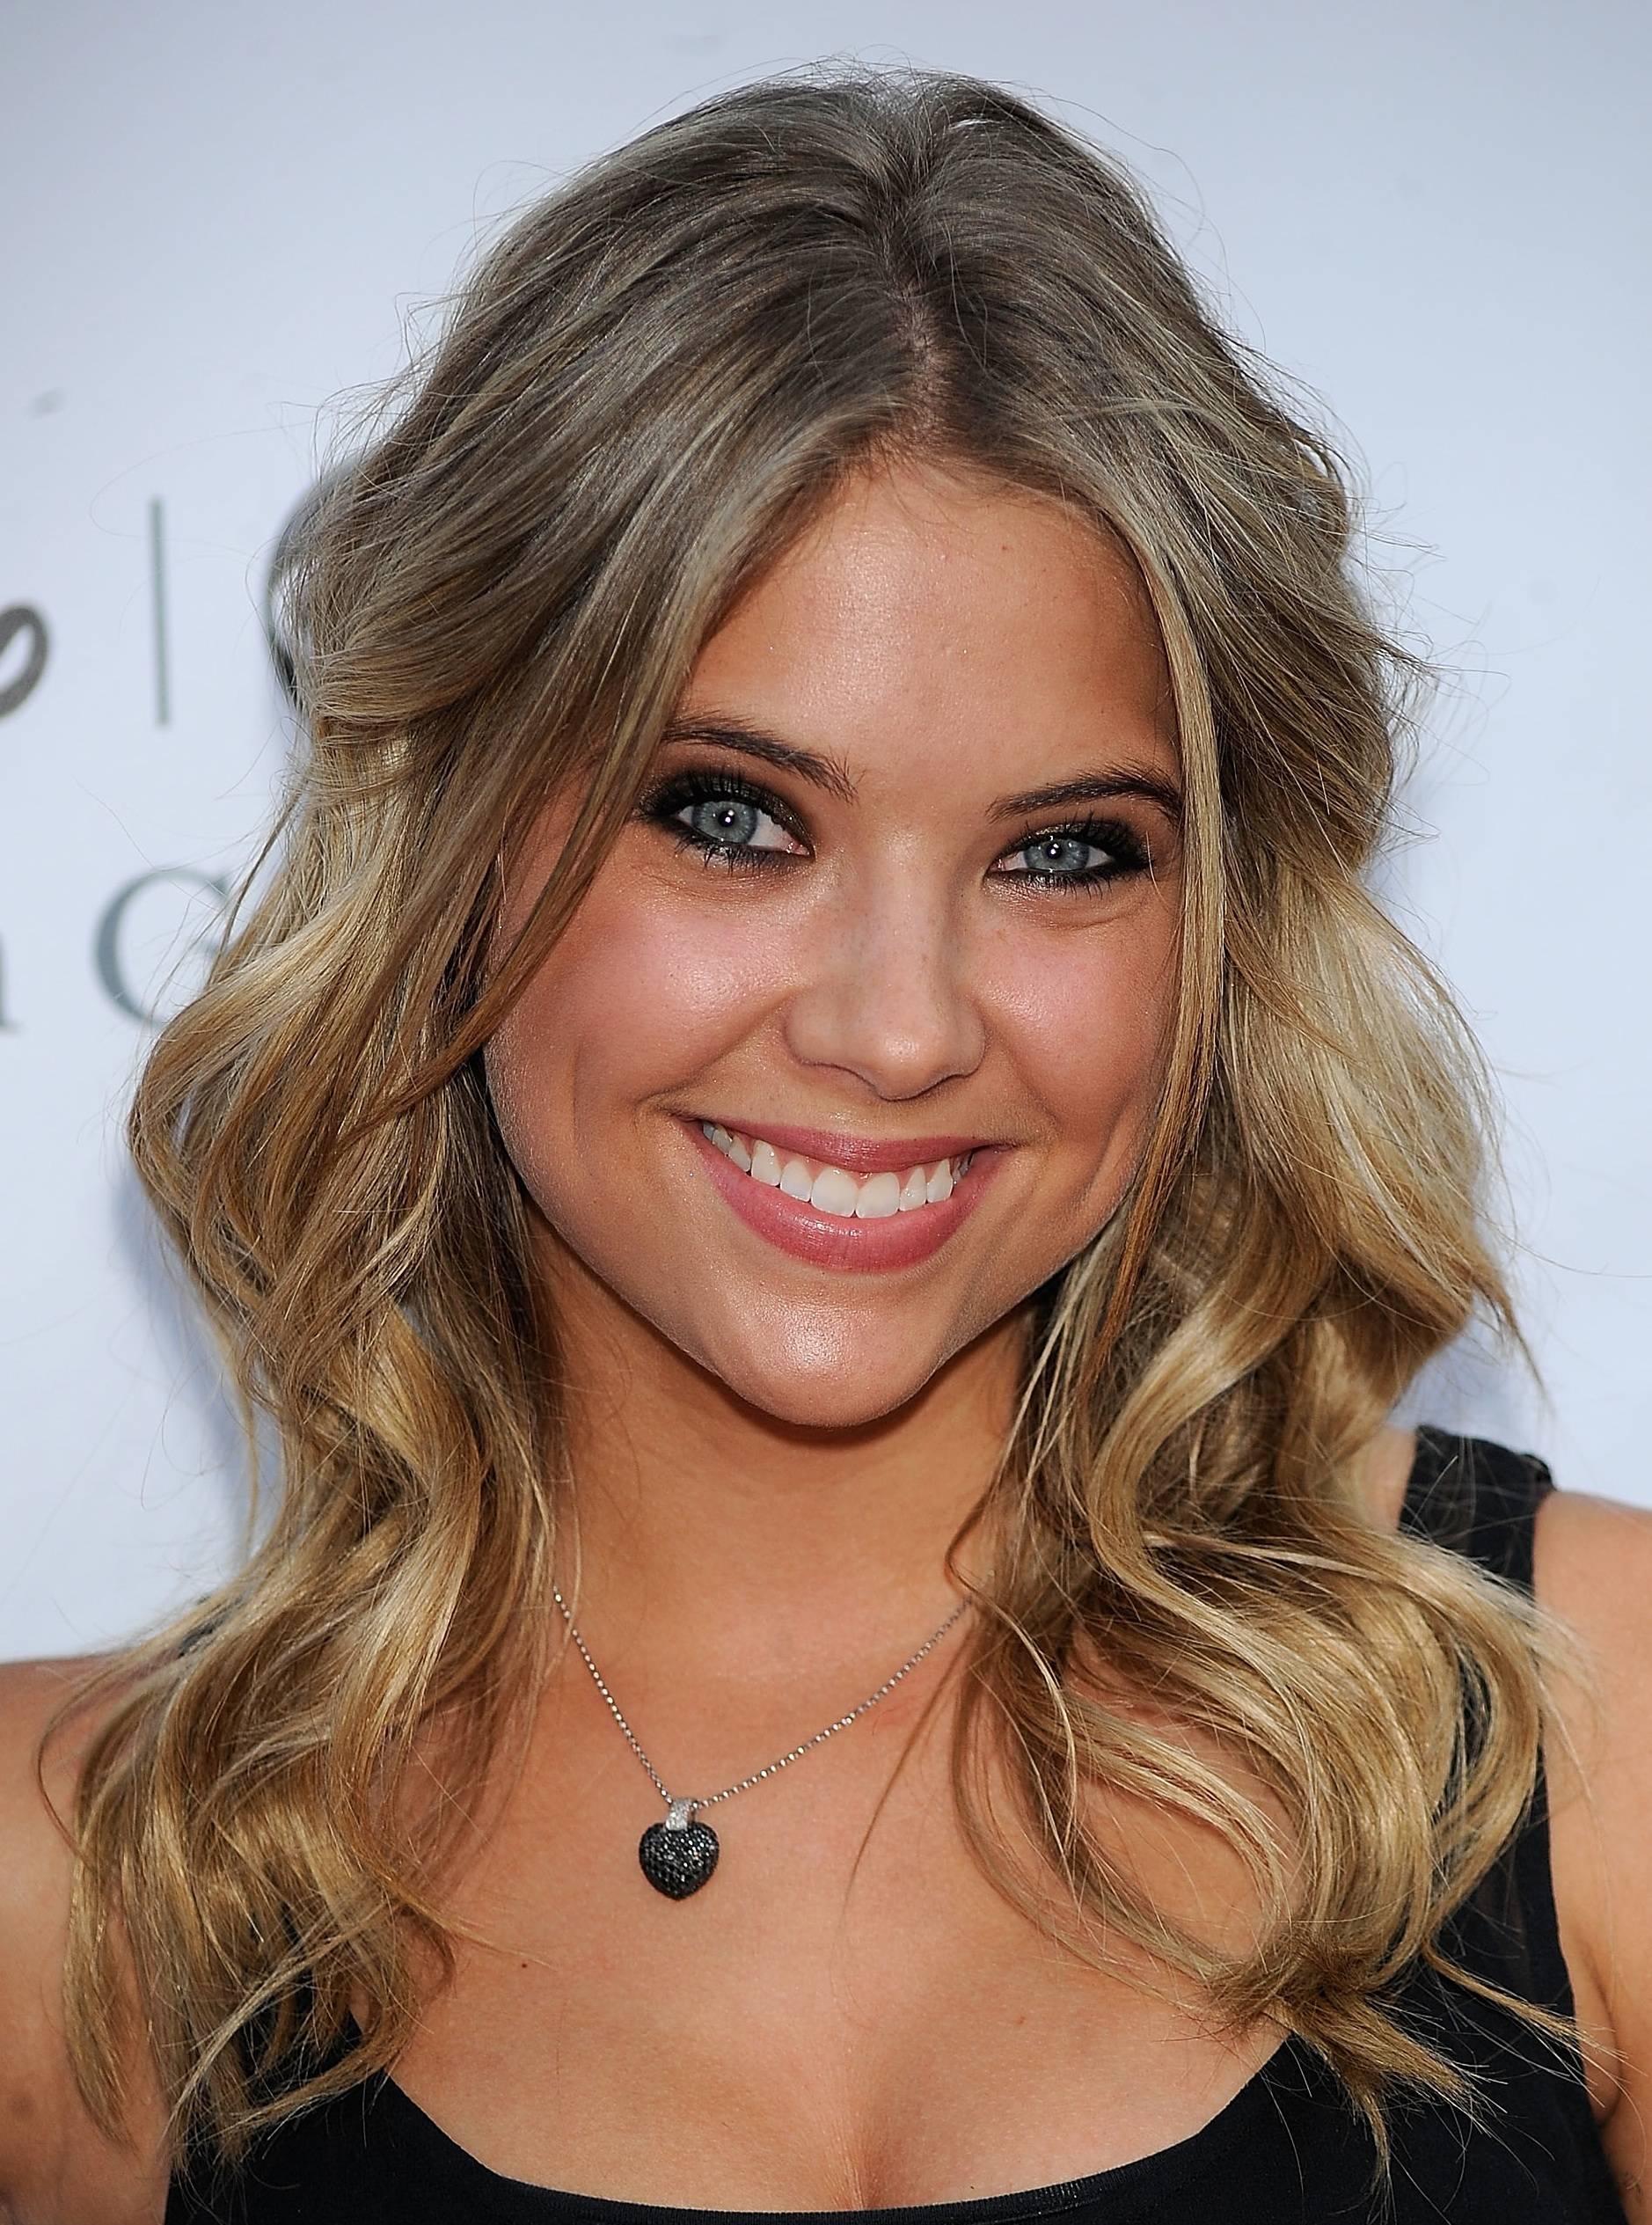 PASADENA, CA - AUGUST 08: Actress Ashley Benson arrives at Disney-ABC Television Group Summer Press Tour Party at The Langham Hotel on August 8, 2009 in Pasadena, California. (Photo by Frazer Harrison/Getty Images)